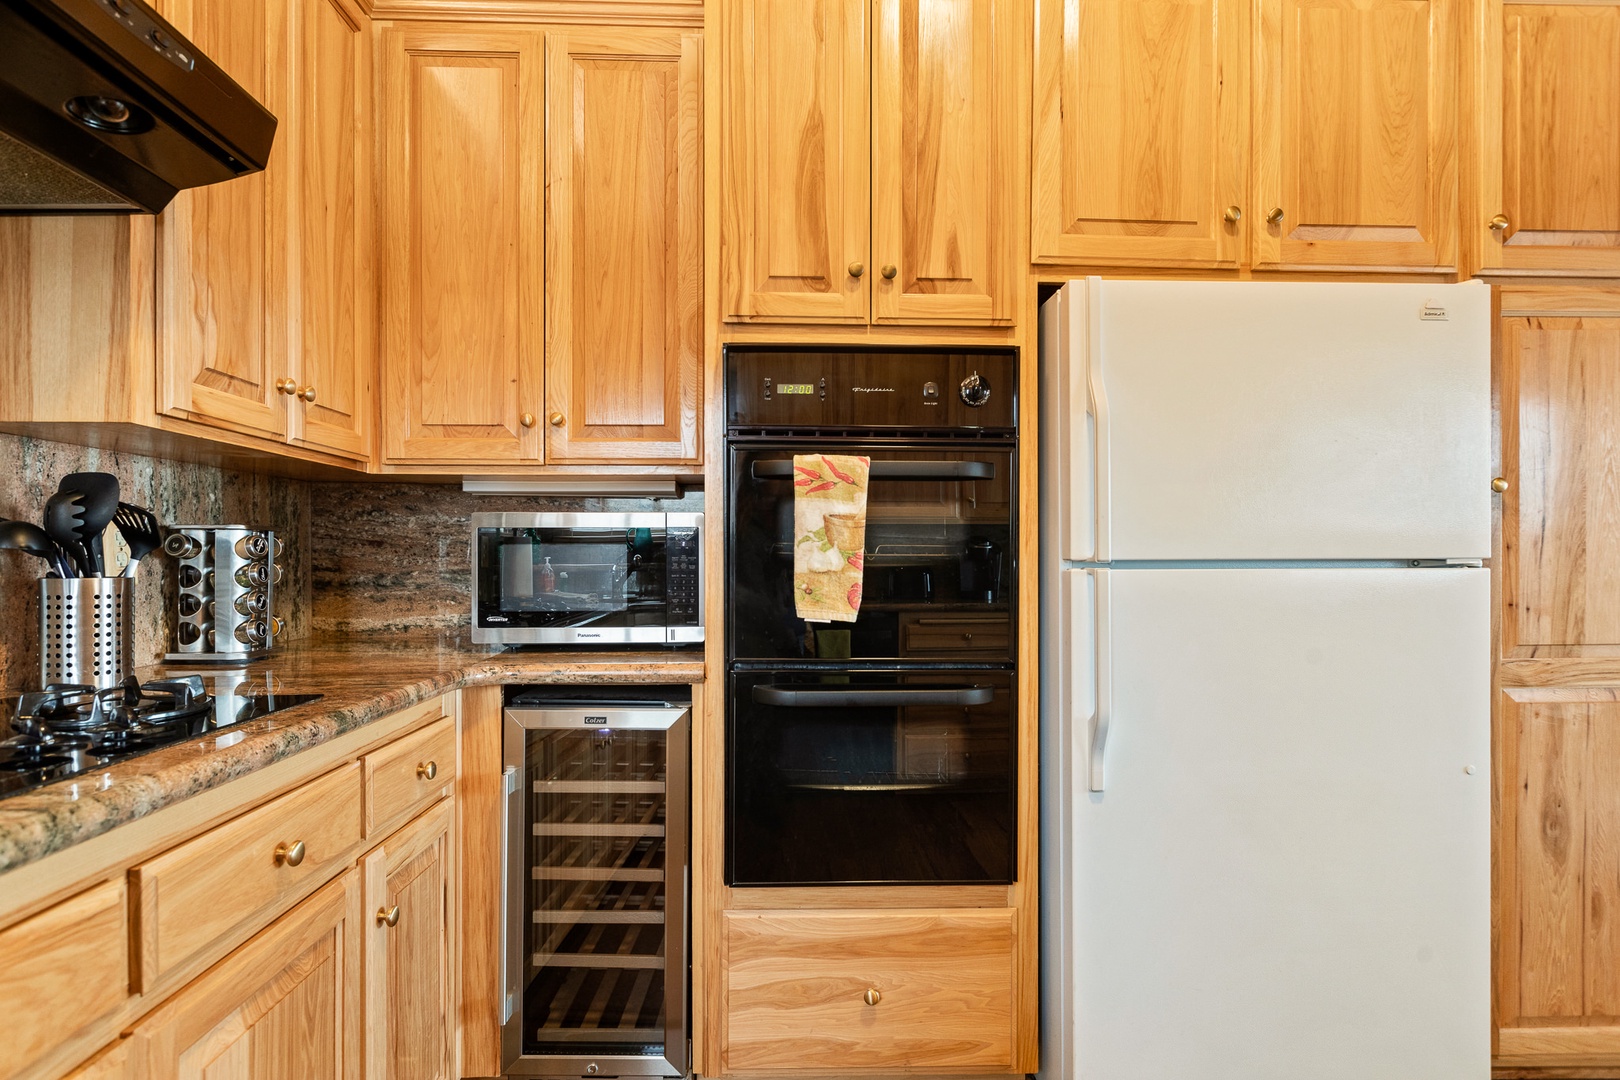 This kitchen offers dual ovens, wine fridge, and plenty of storage space for your stay